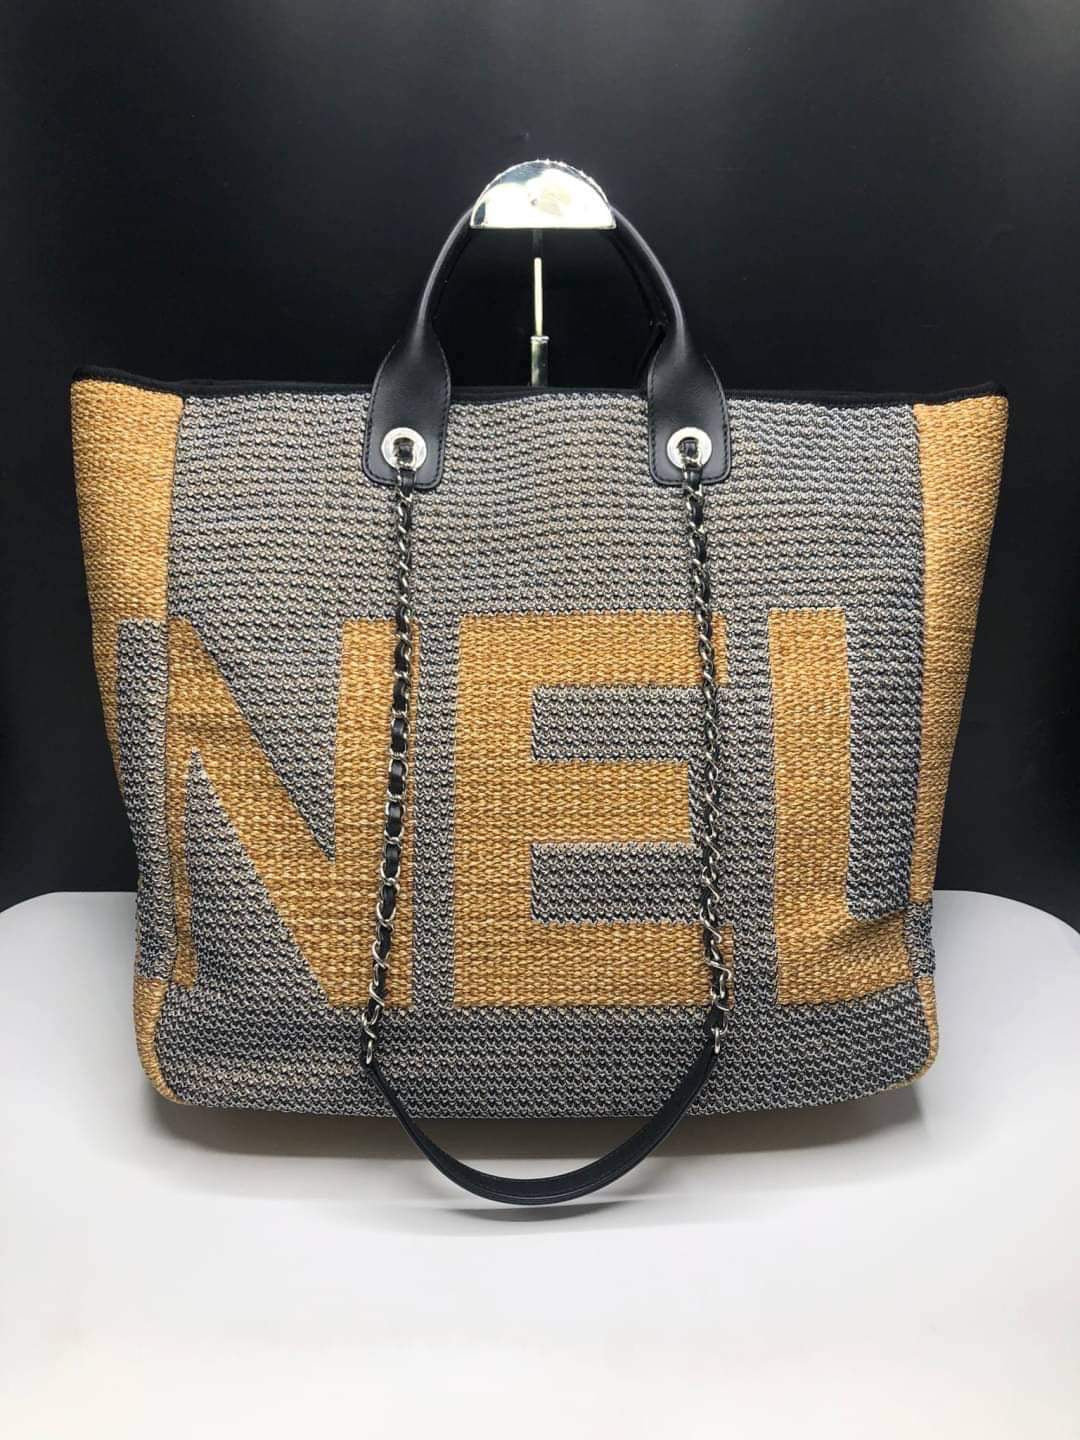 Chanel Deauville Woven Large Shopping Tote Bag